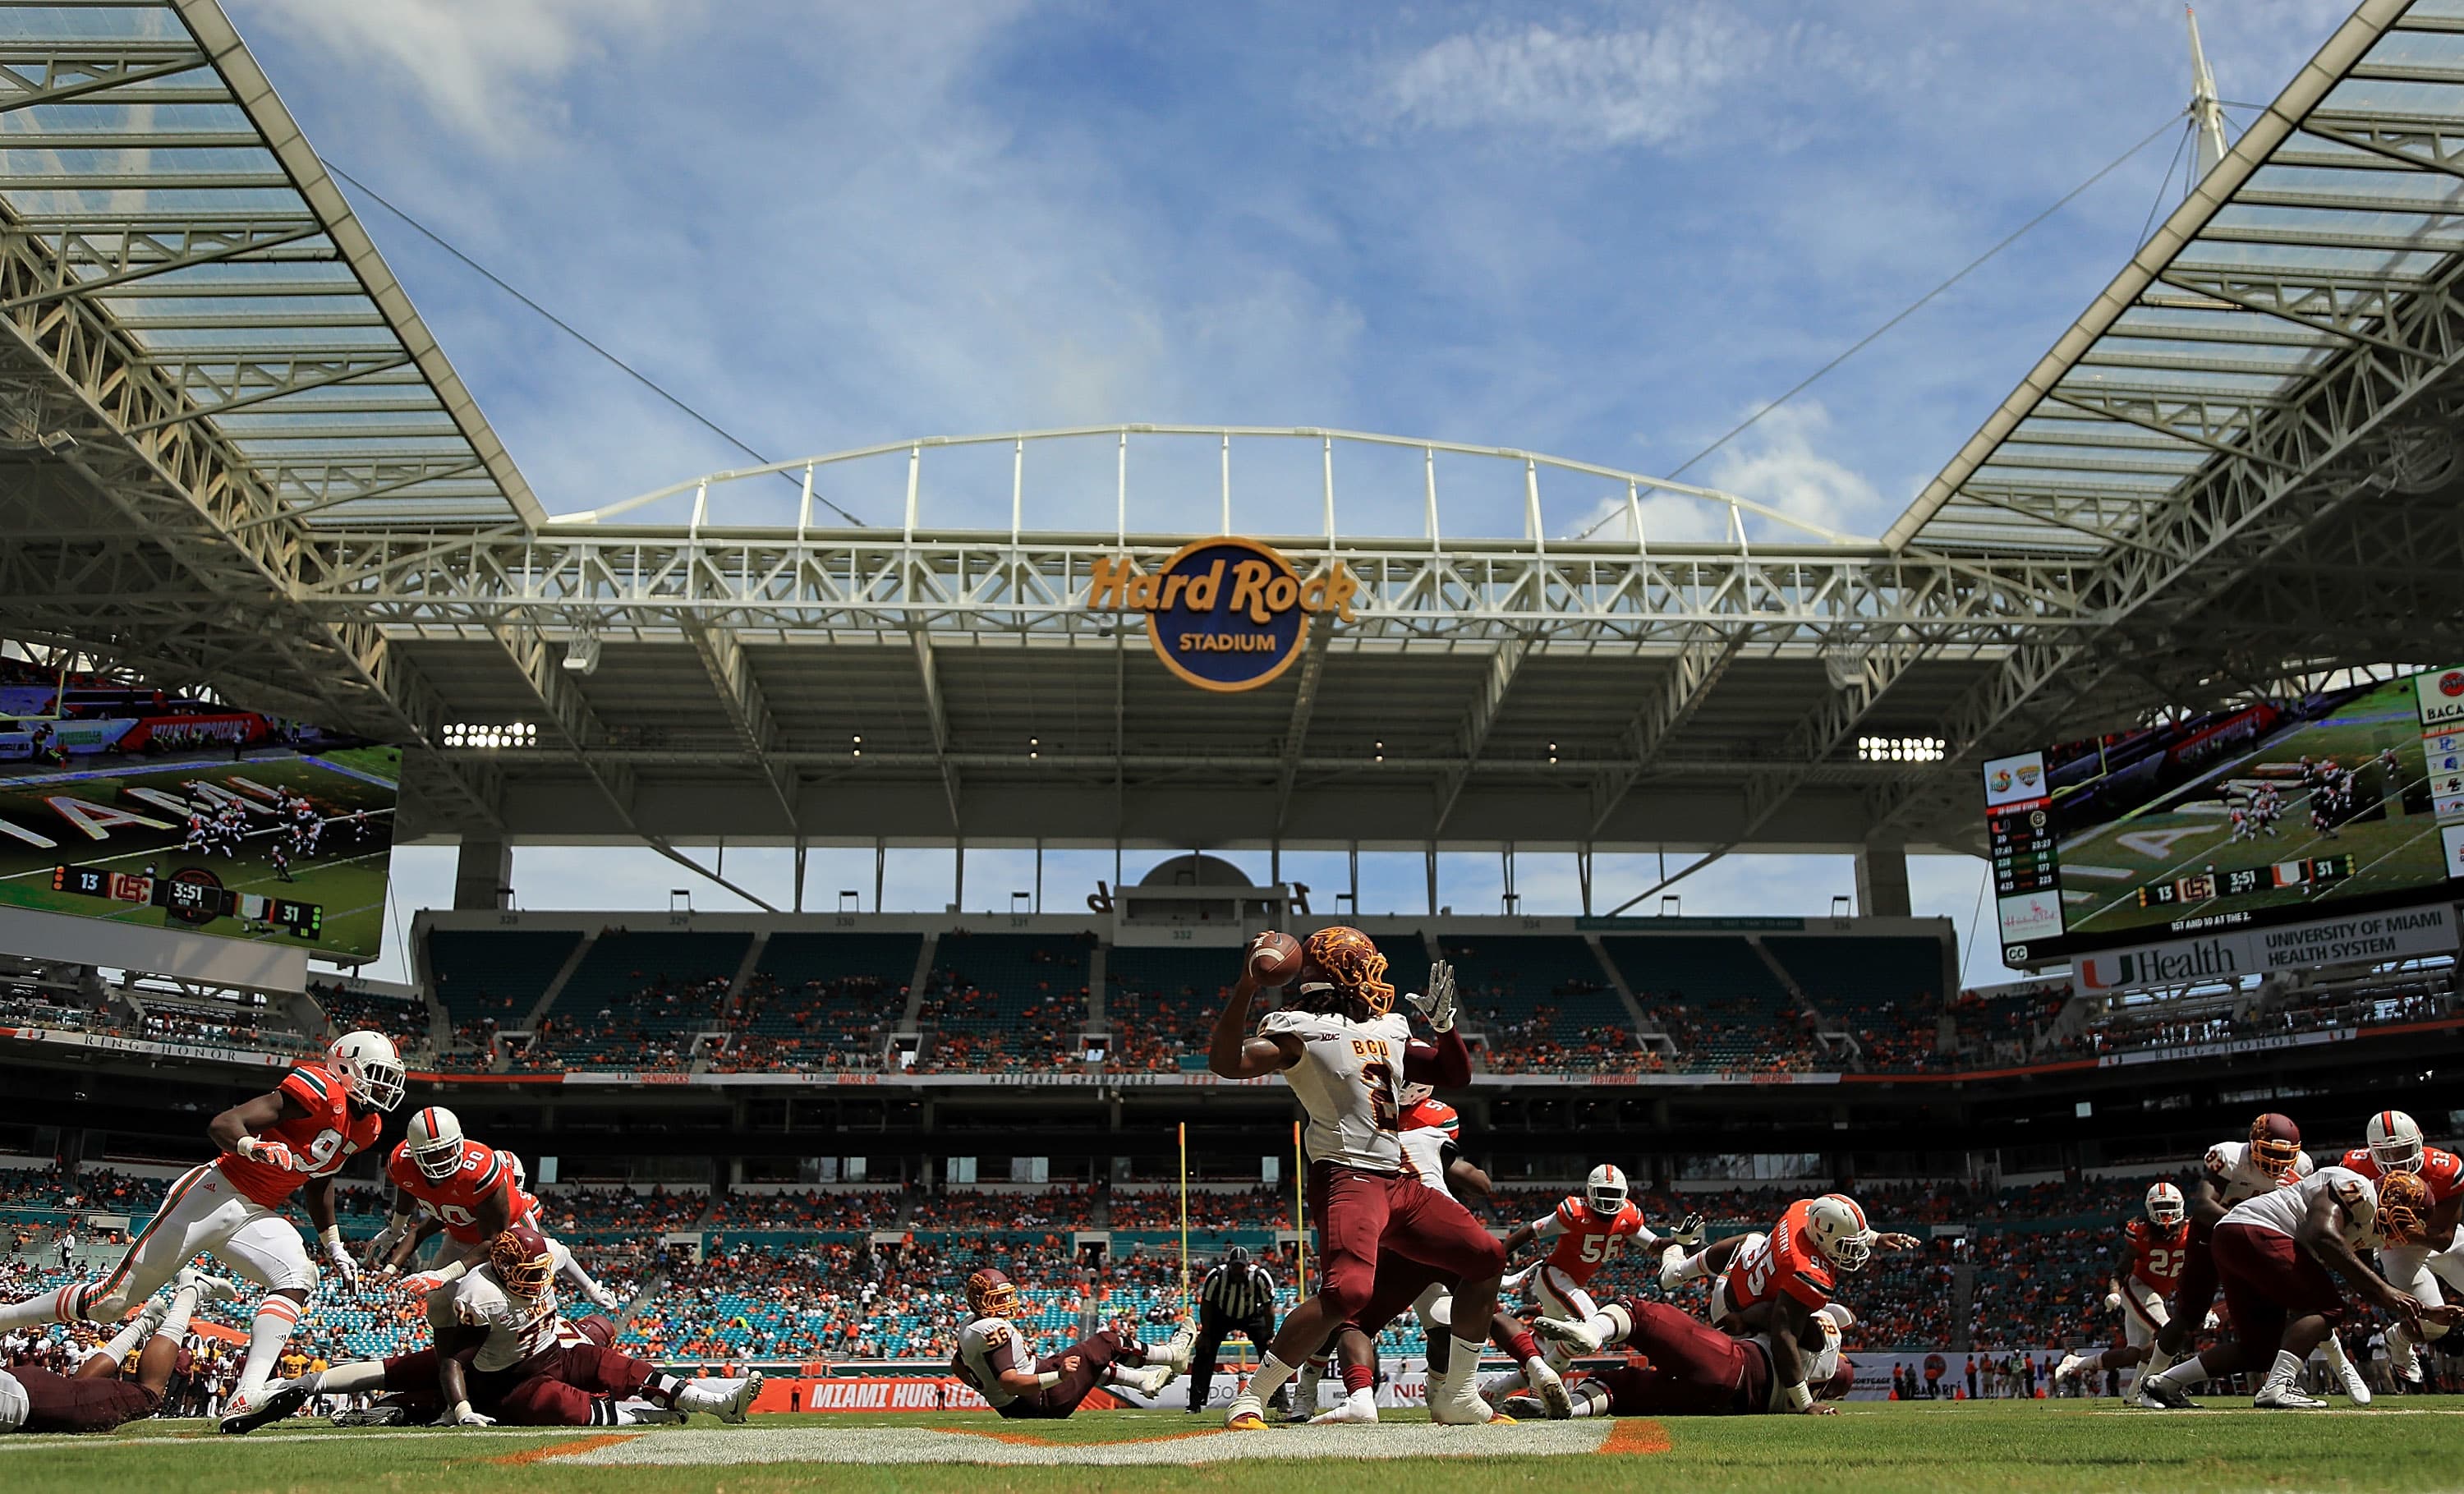 Super Bowl 2020: Here's your travel guide to the big game in Miami